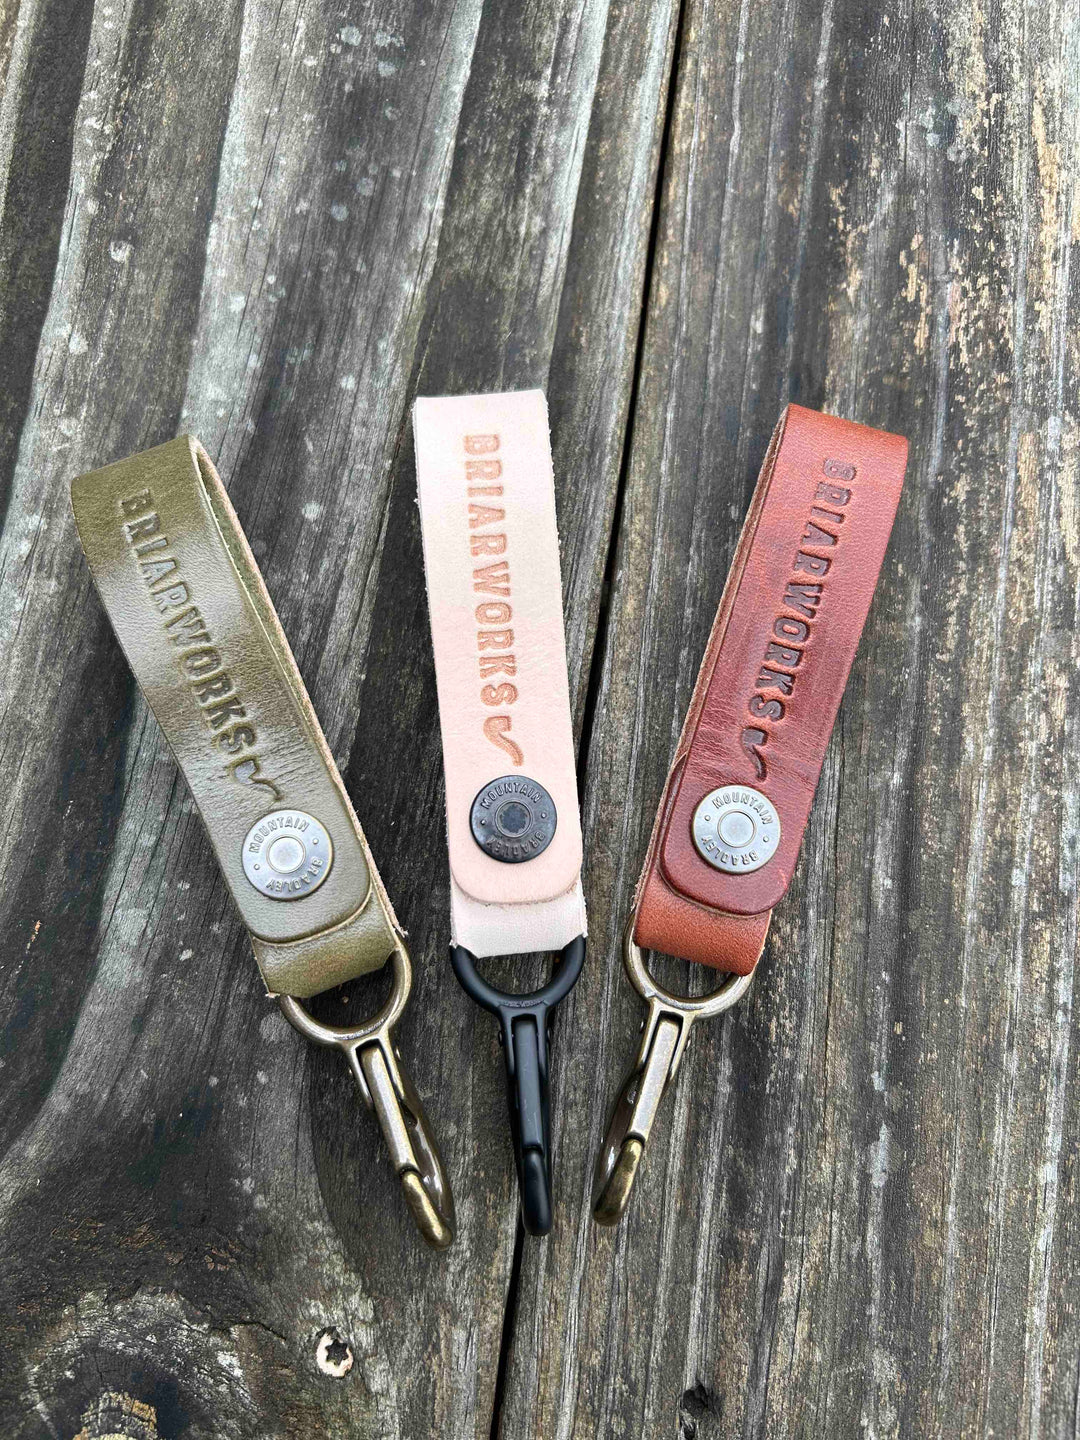 BriarWorks x Bradley Mountain Leather Key Fob and Pipe Rest - Natural